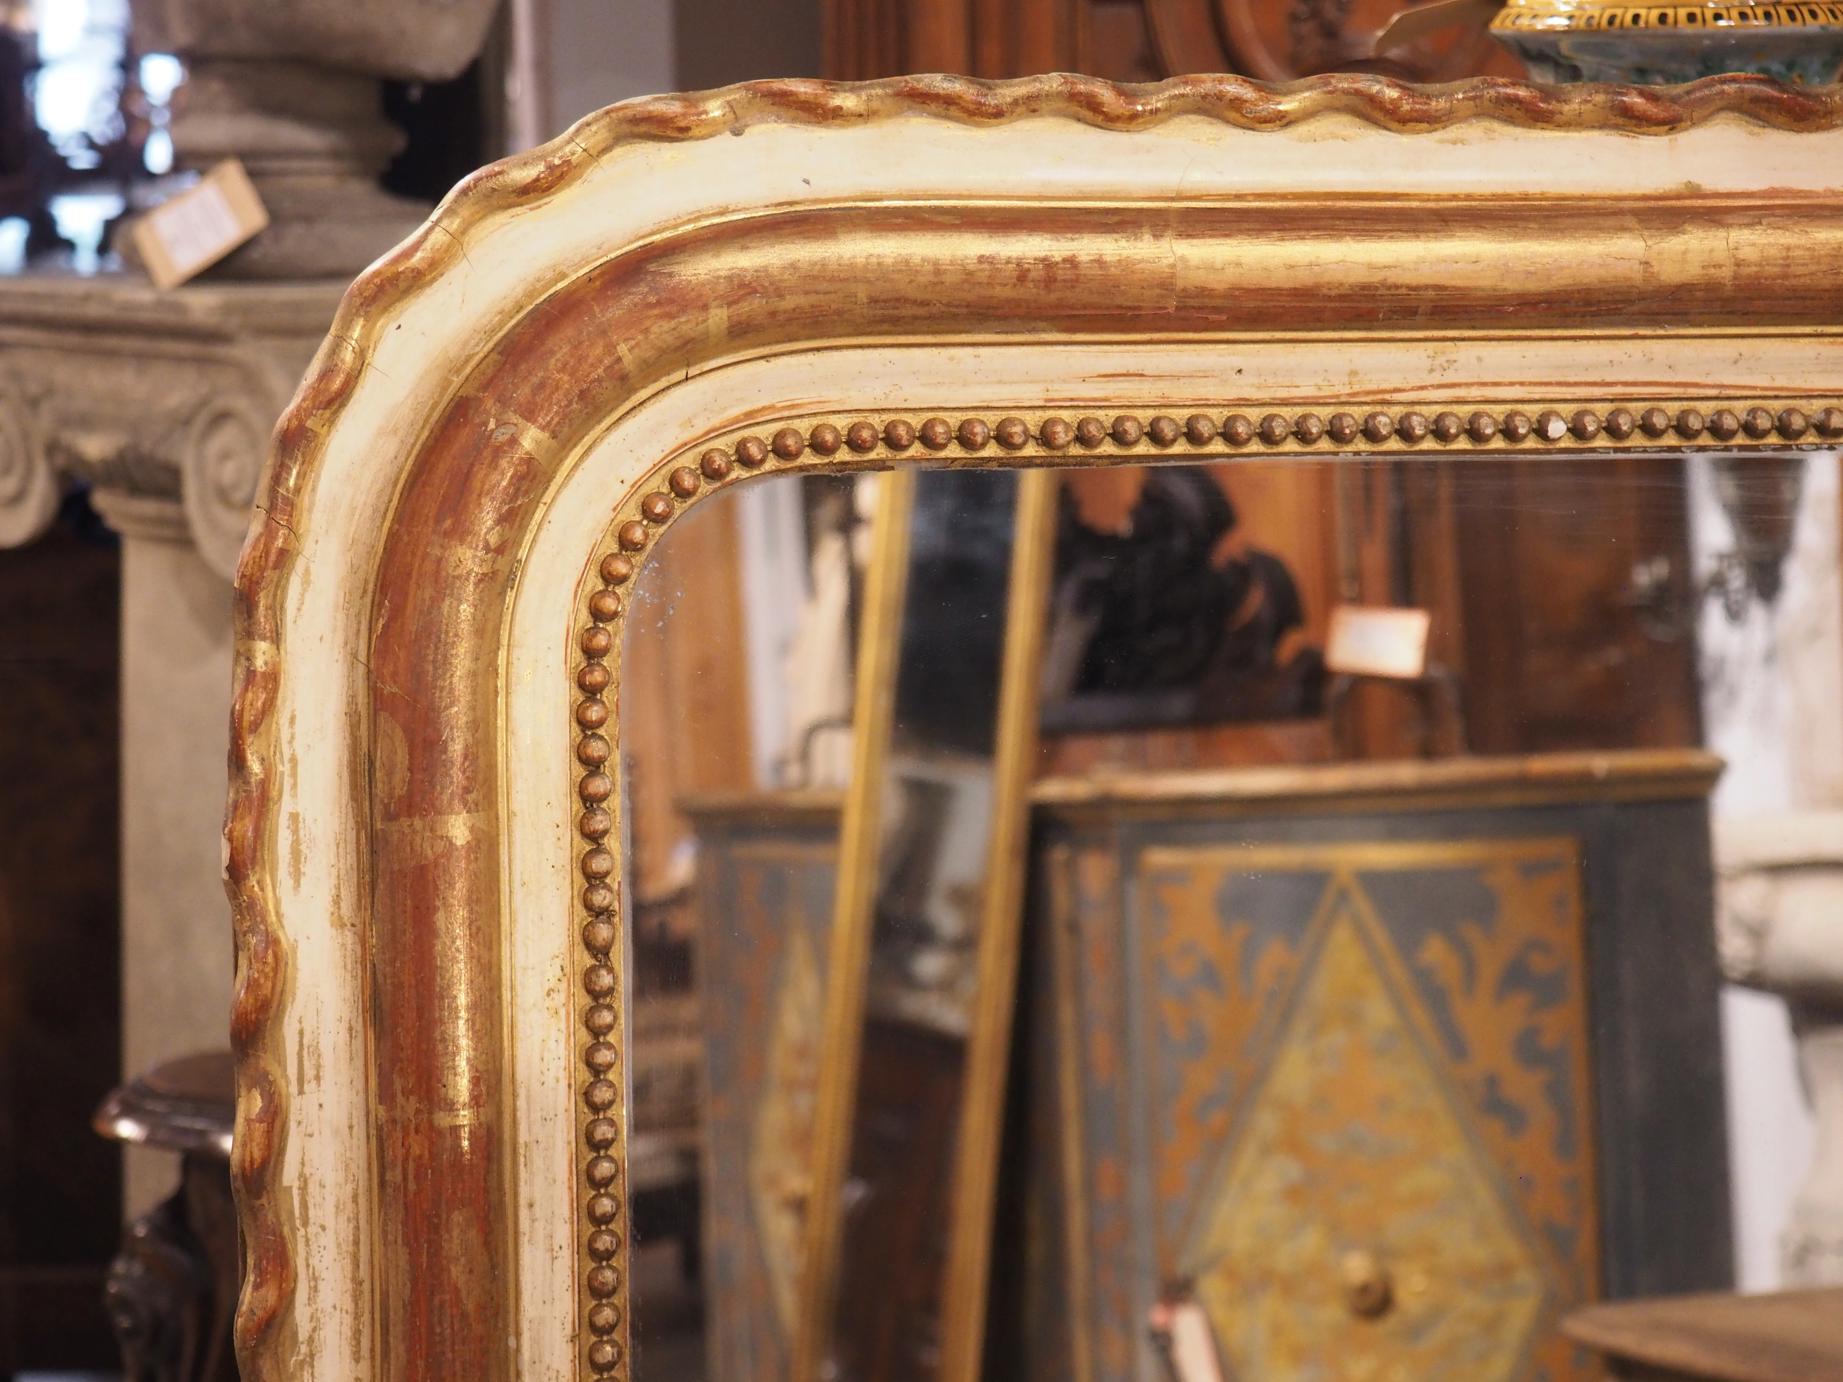 Antique French Painted and Gilt Louis Philippe Style Mirror with Scalloped  Edges, 19th Century - Le Louvre French Antiques